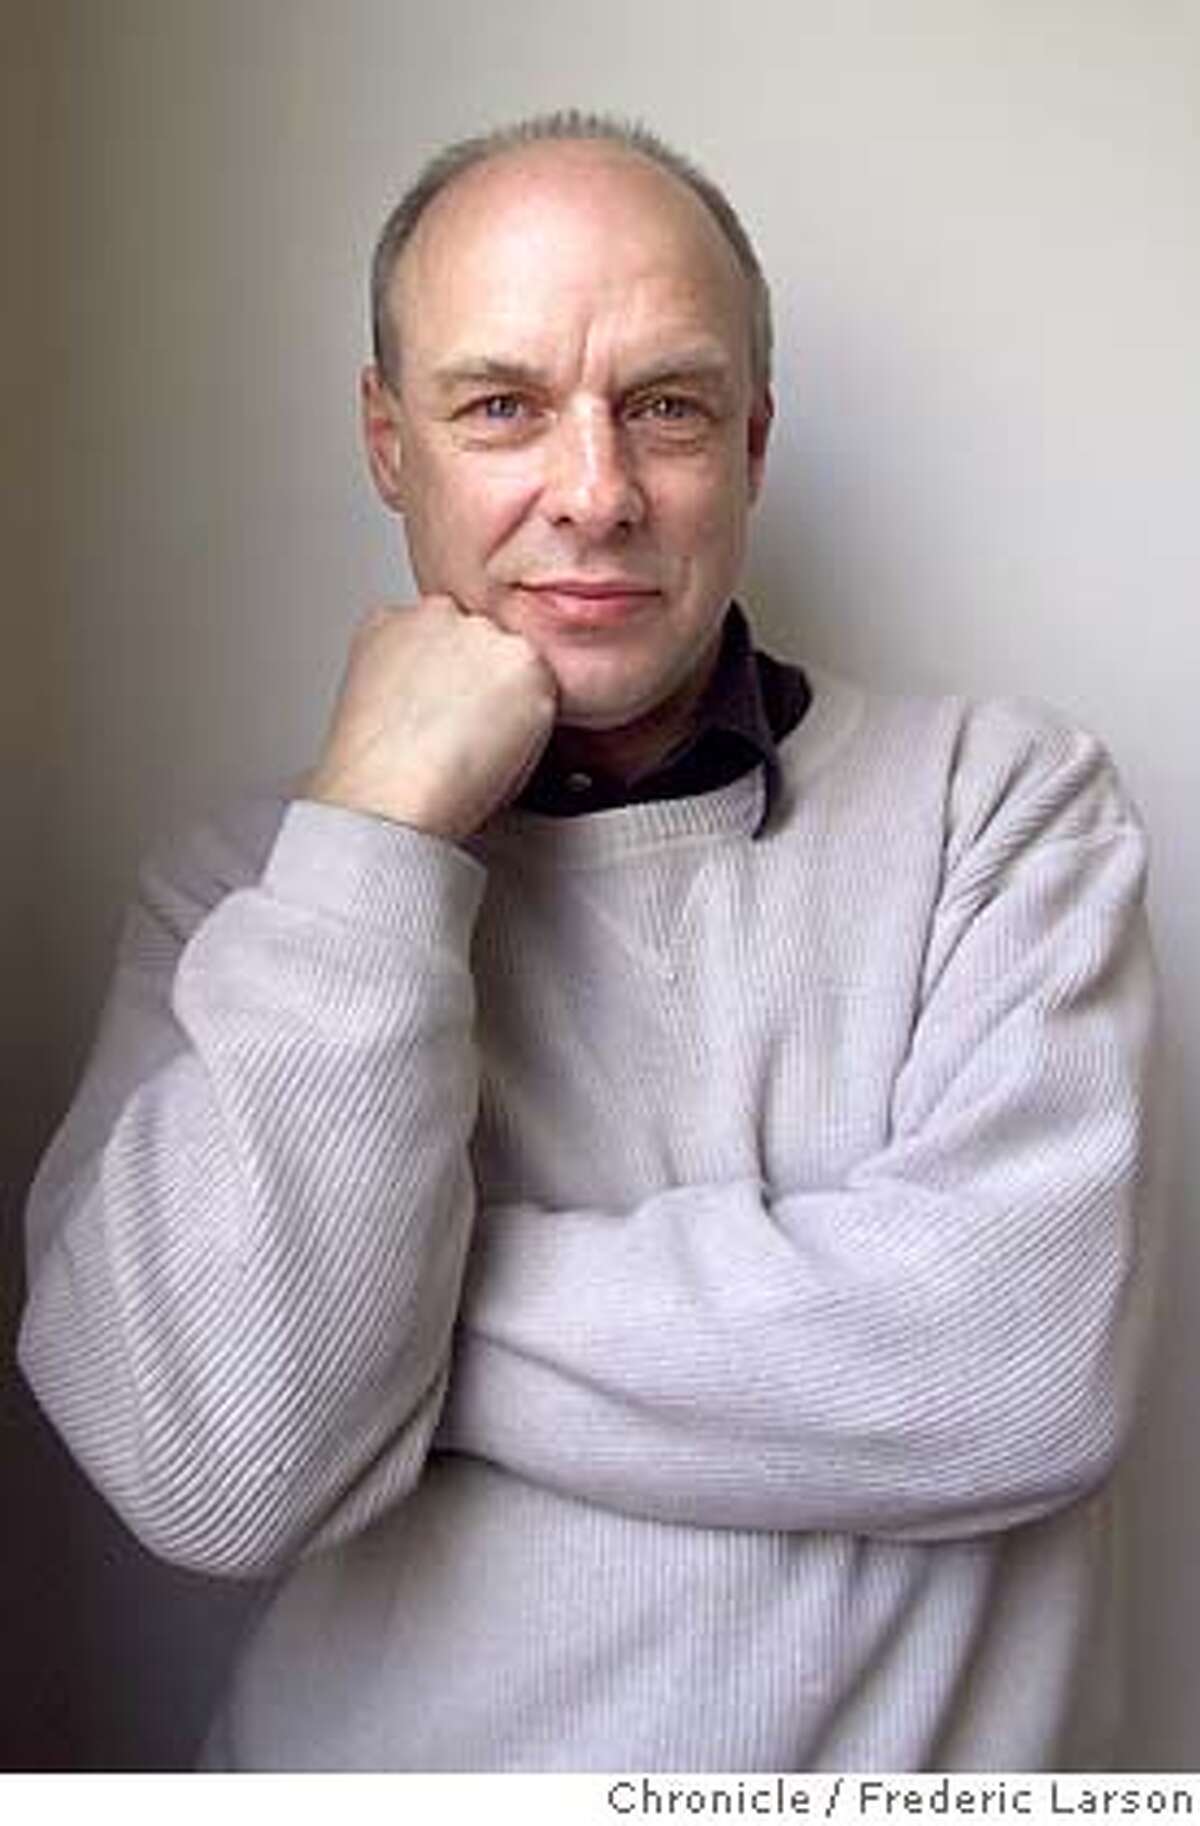 � ENO17-16FEB01-DD-FRL: Musician Brian Eno at SFMOMA Eno introduced the "sound sculpture' he's created as part of the big show of "technologically-informed art' opening shortly at SFMOMA. Chronicle photo by Frederic Larson CAT